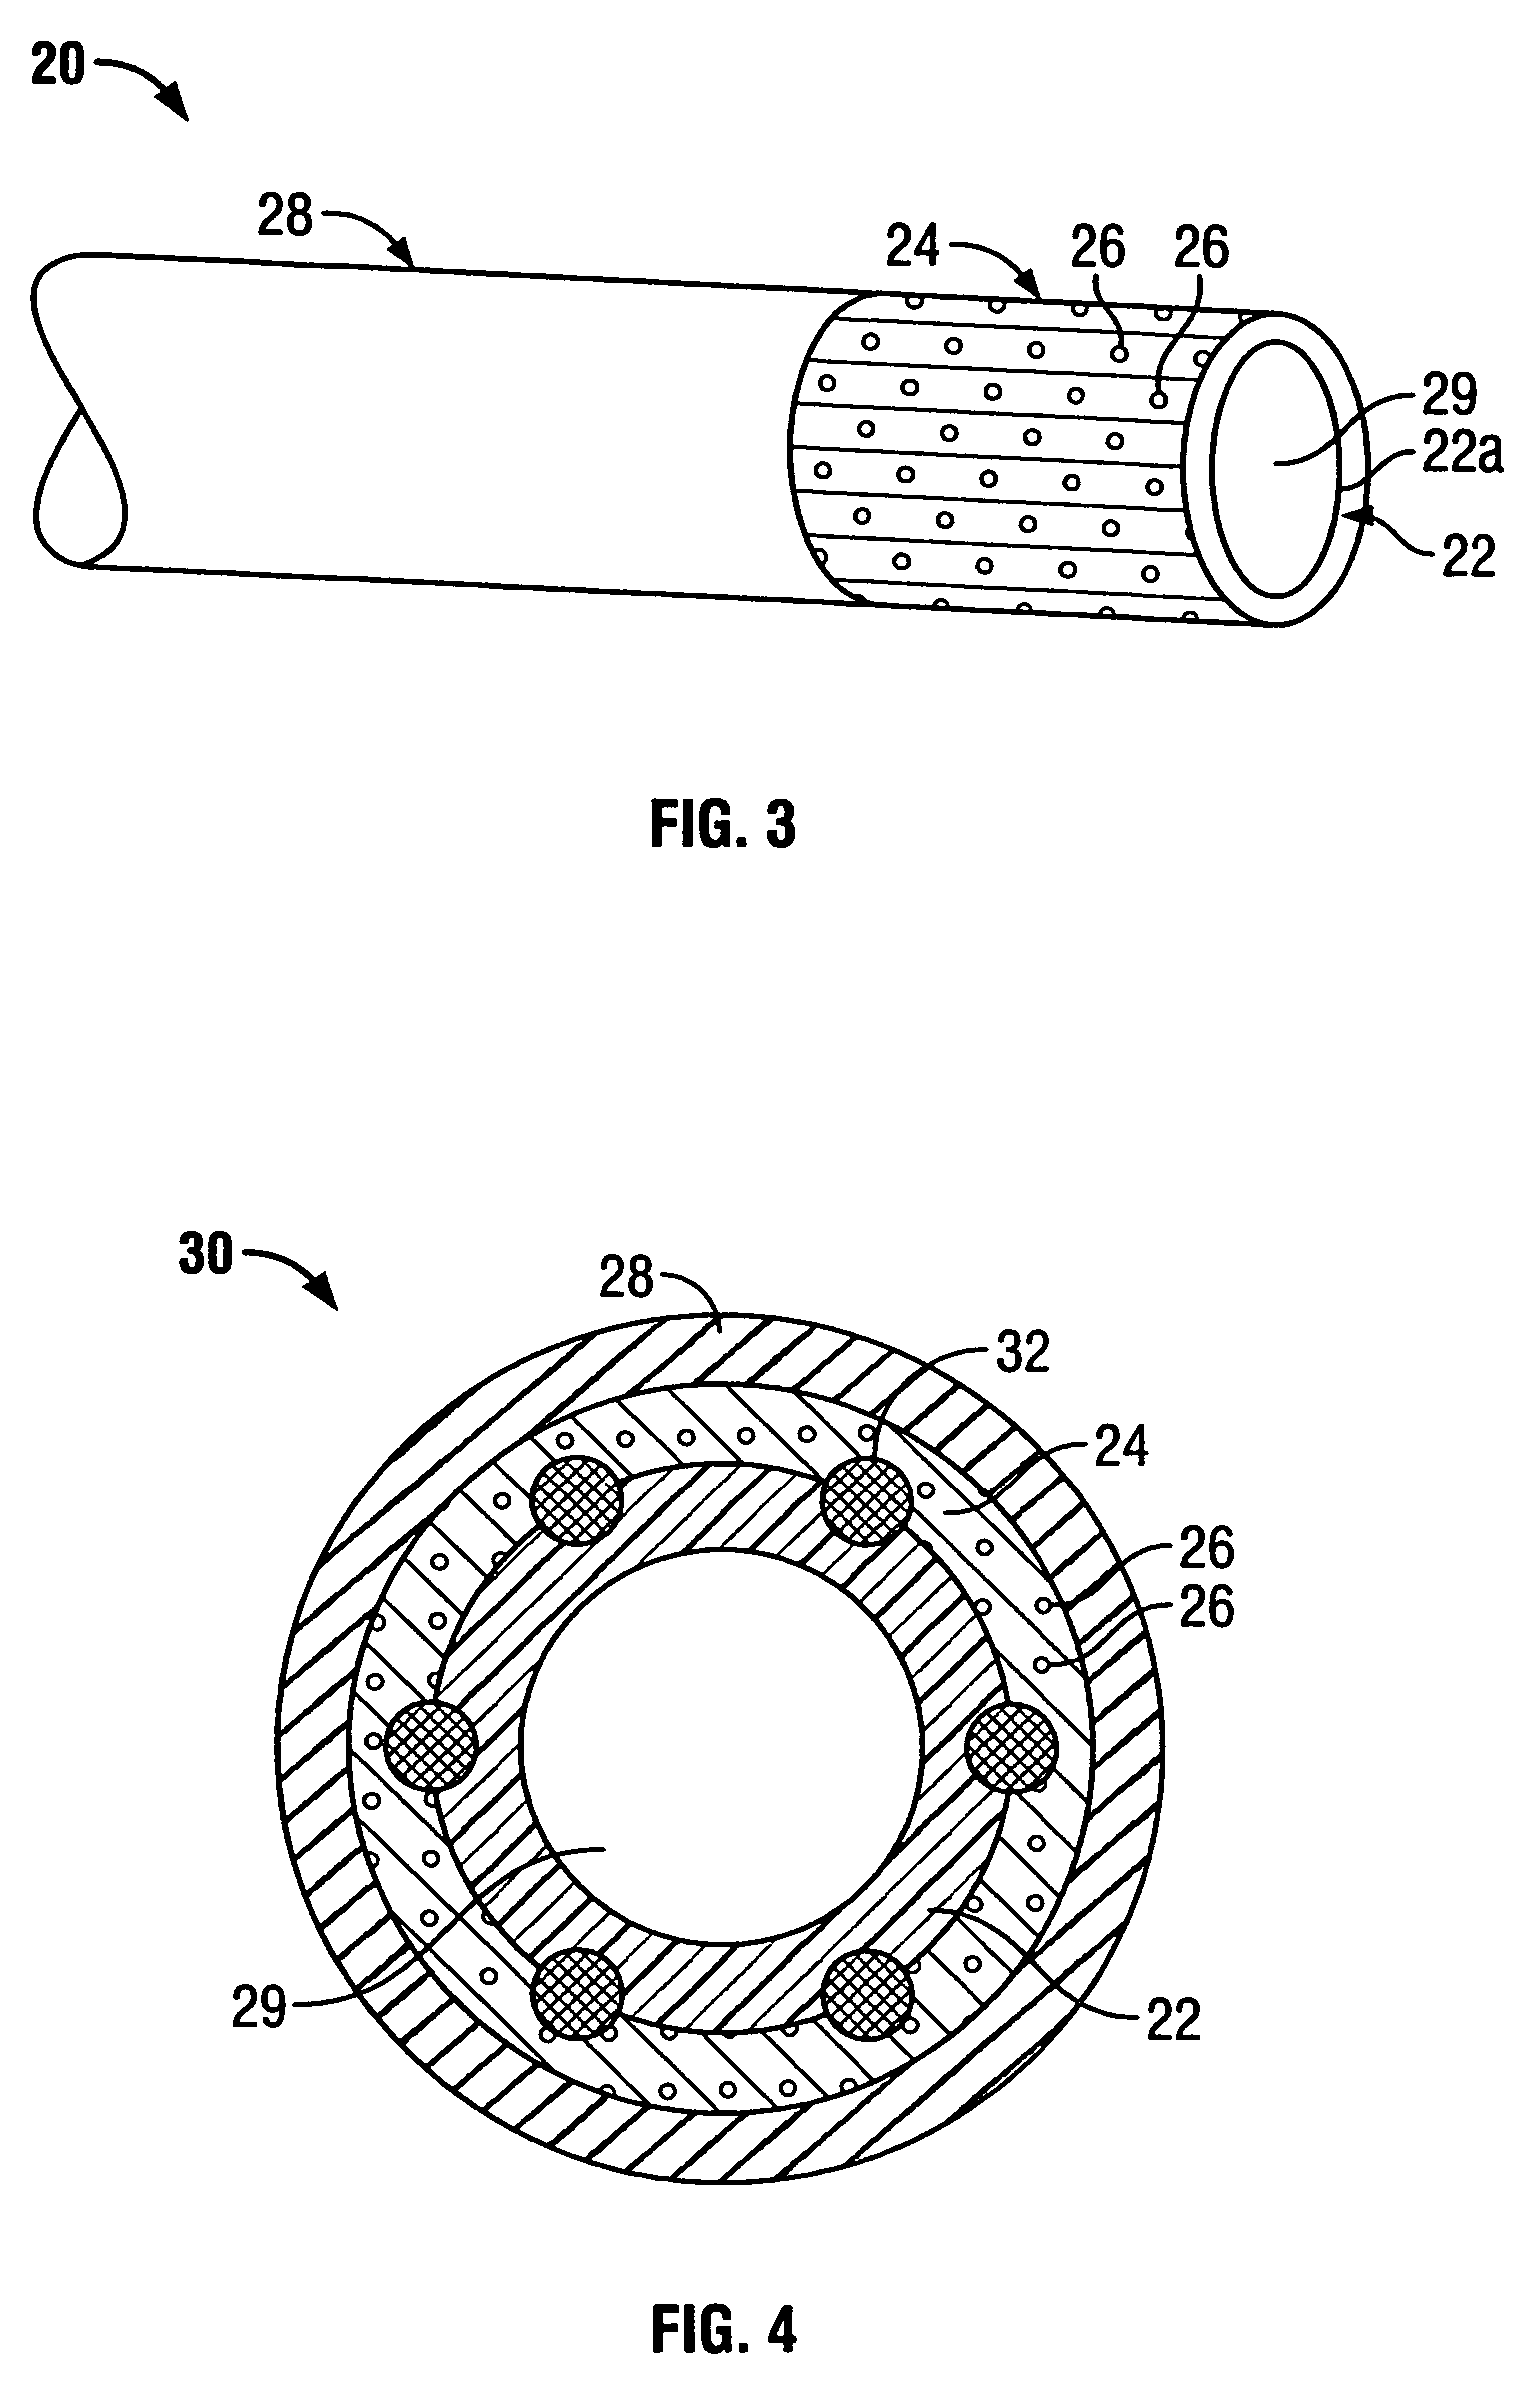 Composite vascular graft including bioactive agent coating and biodegradable sheath